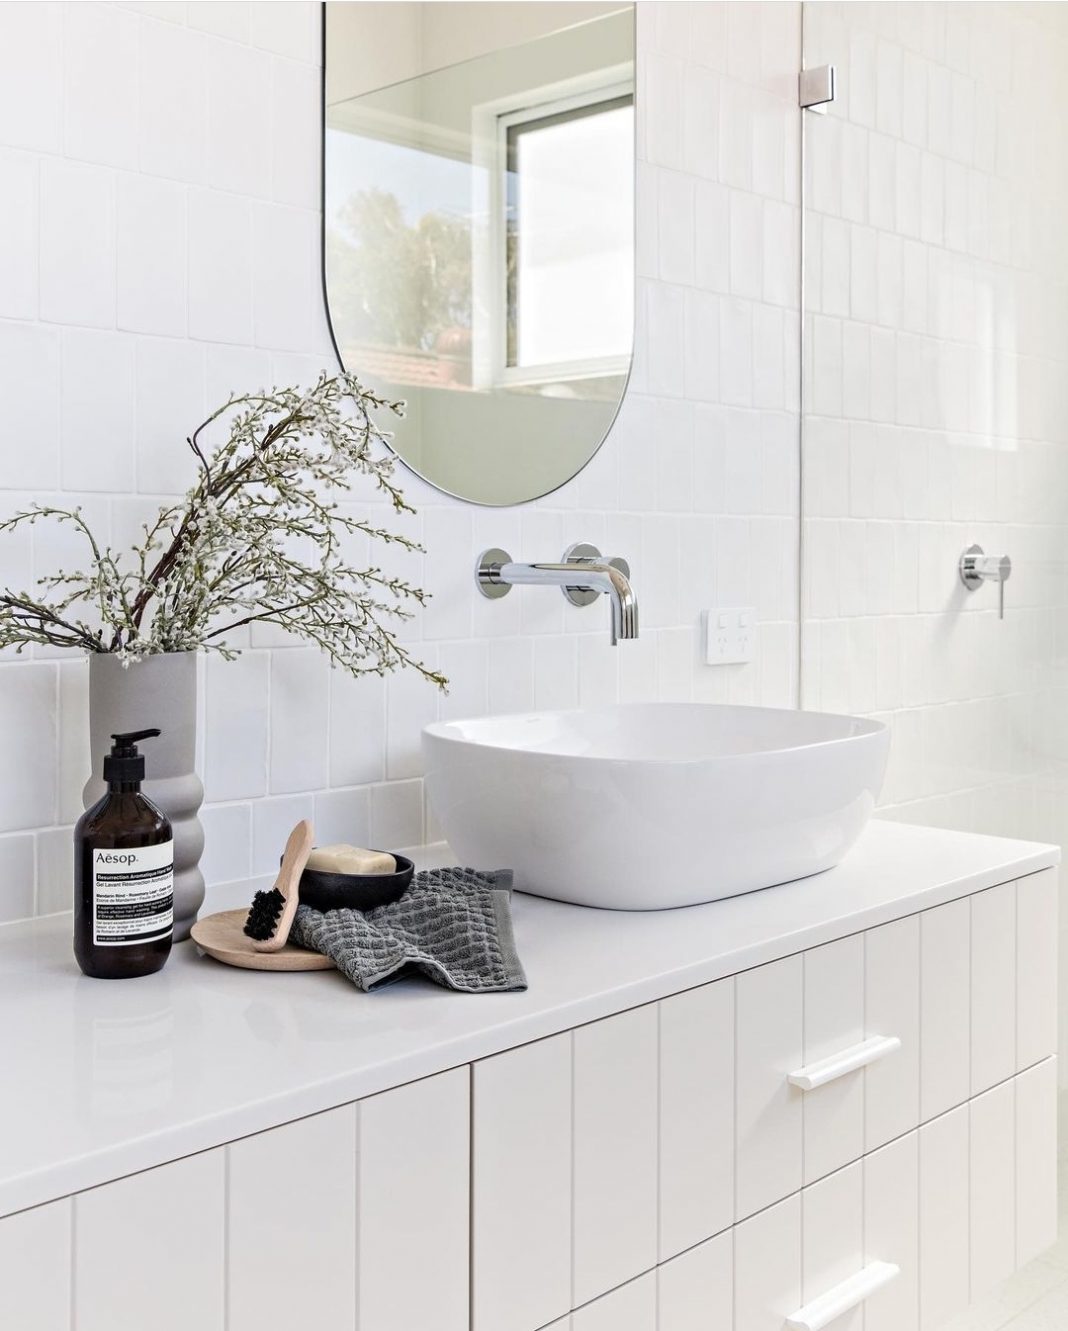 Bathroom styling inspiration | How to style your bathroom